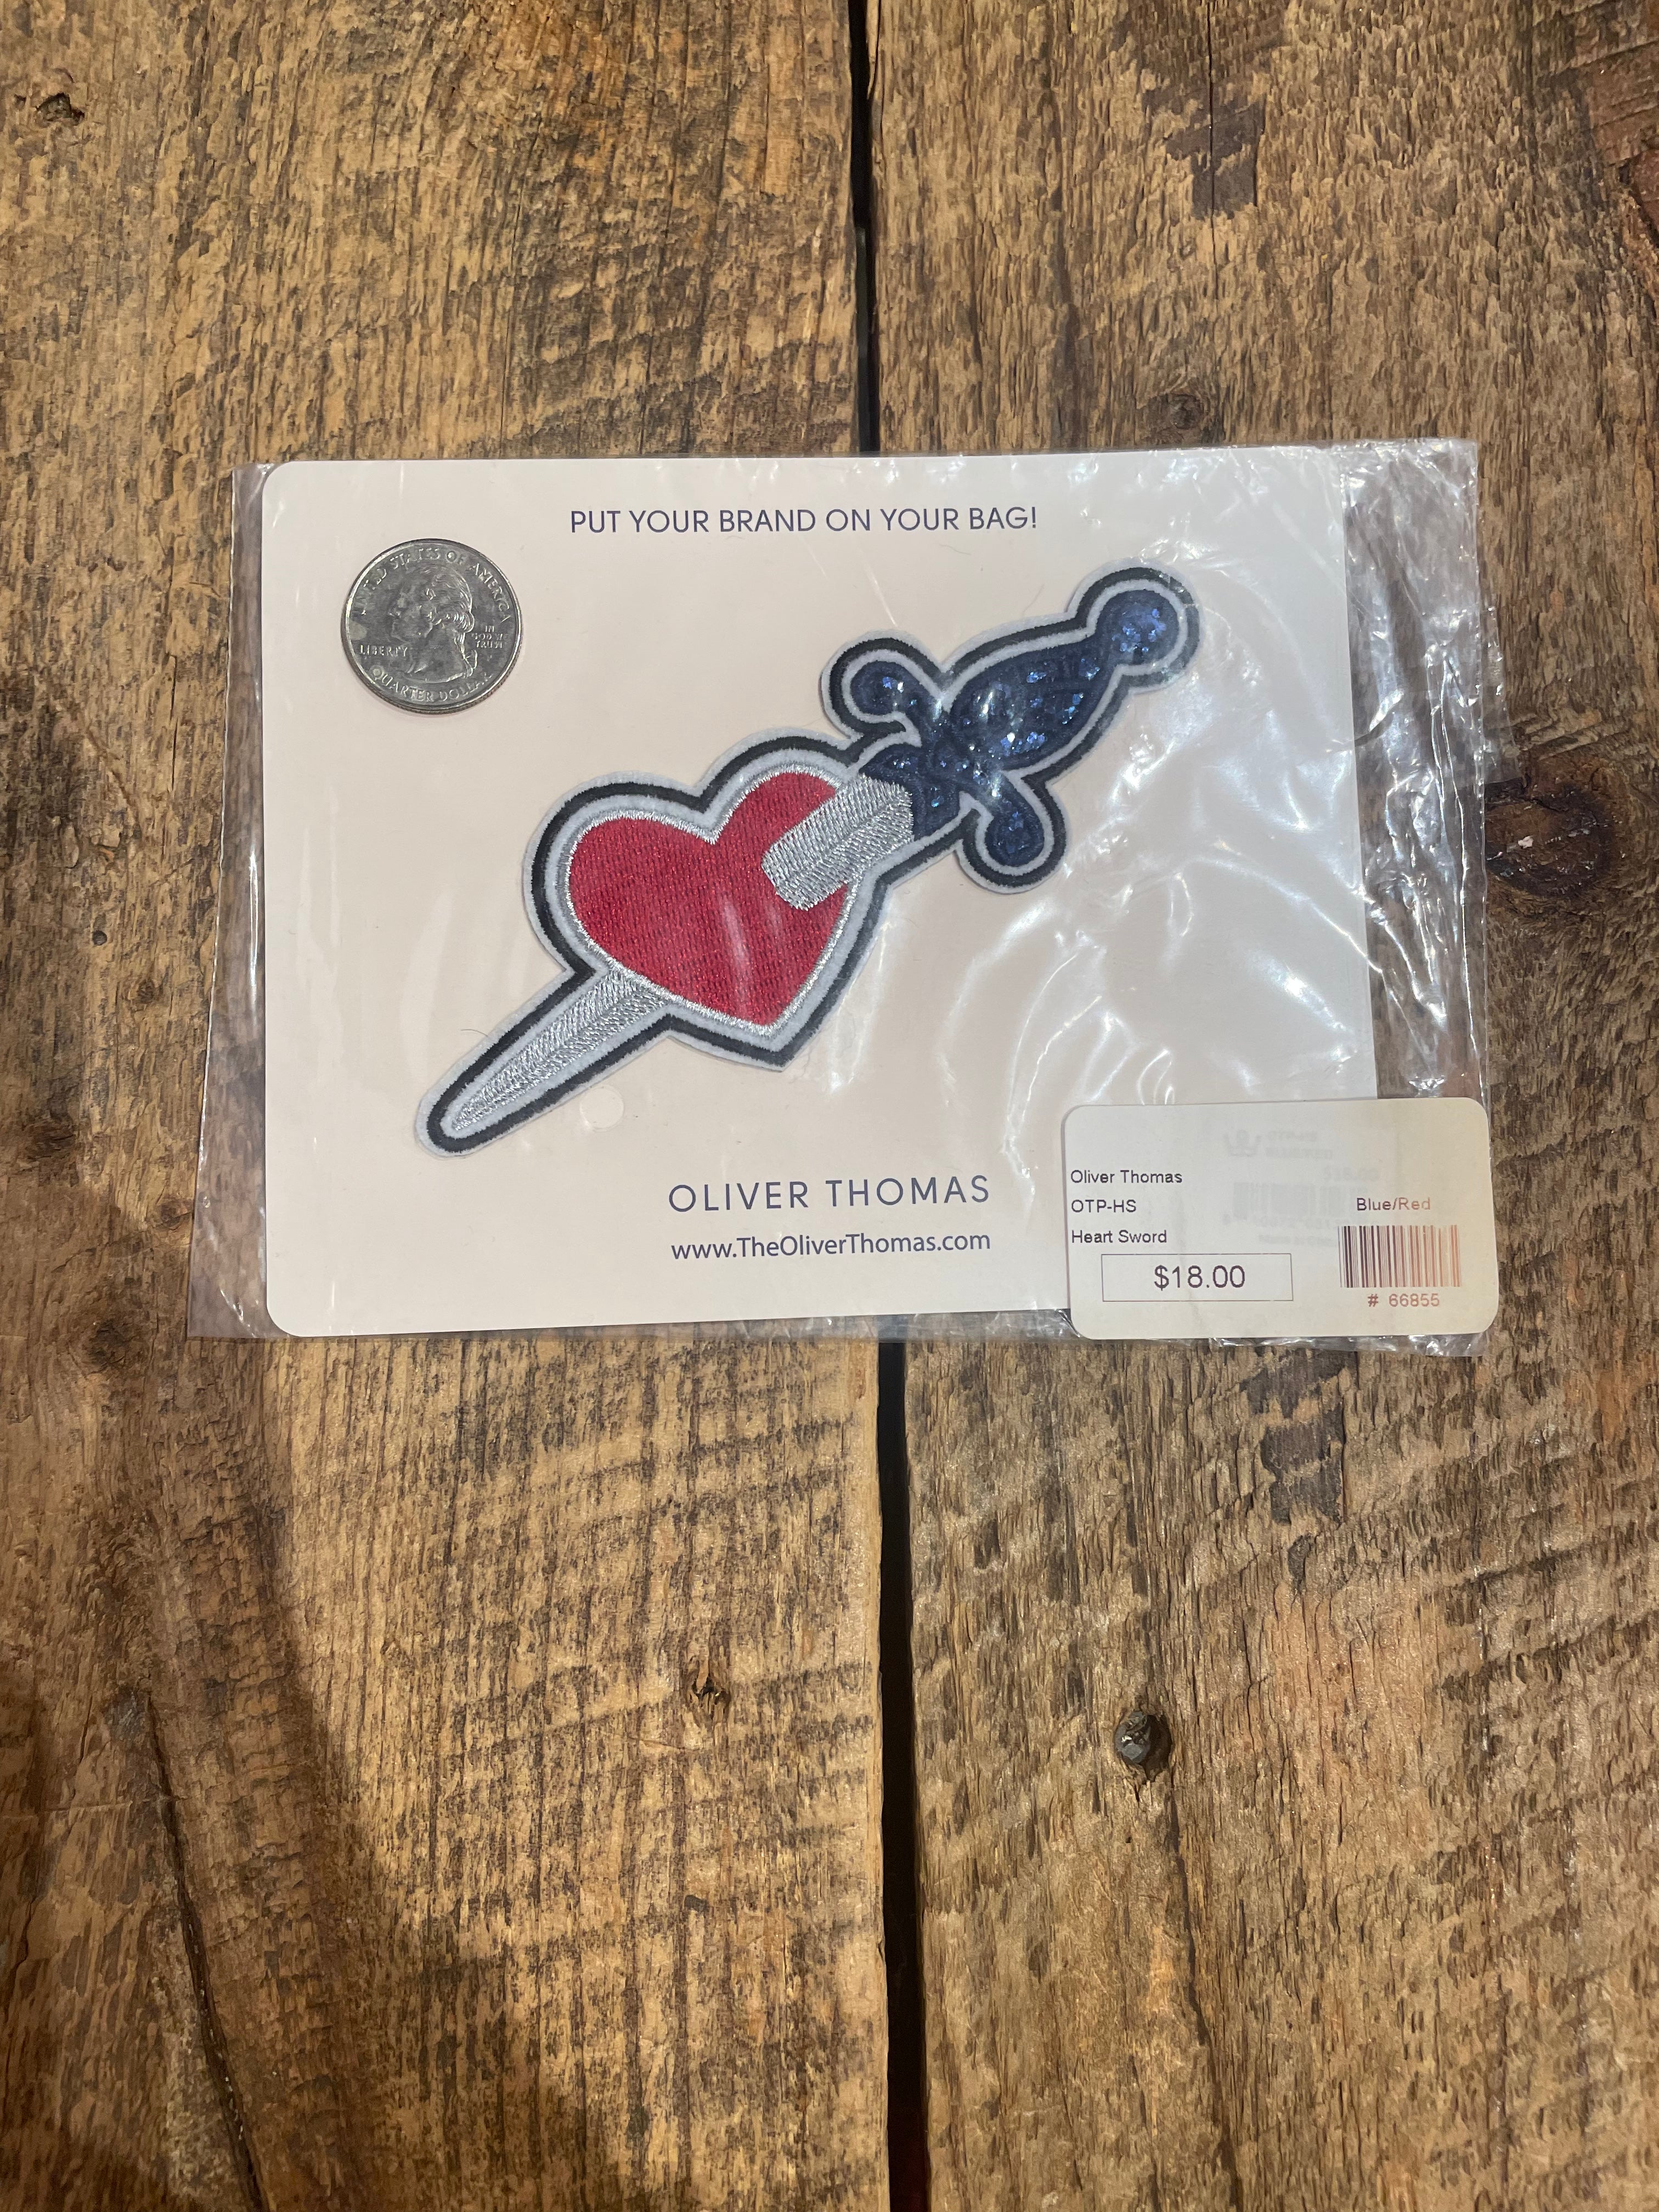 Sword Through the Heart Patch in Silver/Red/Blue